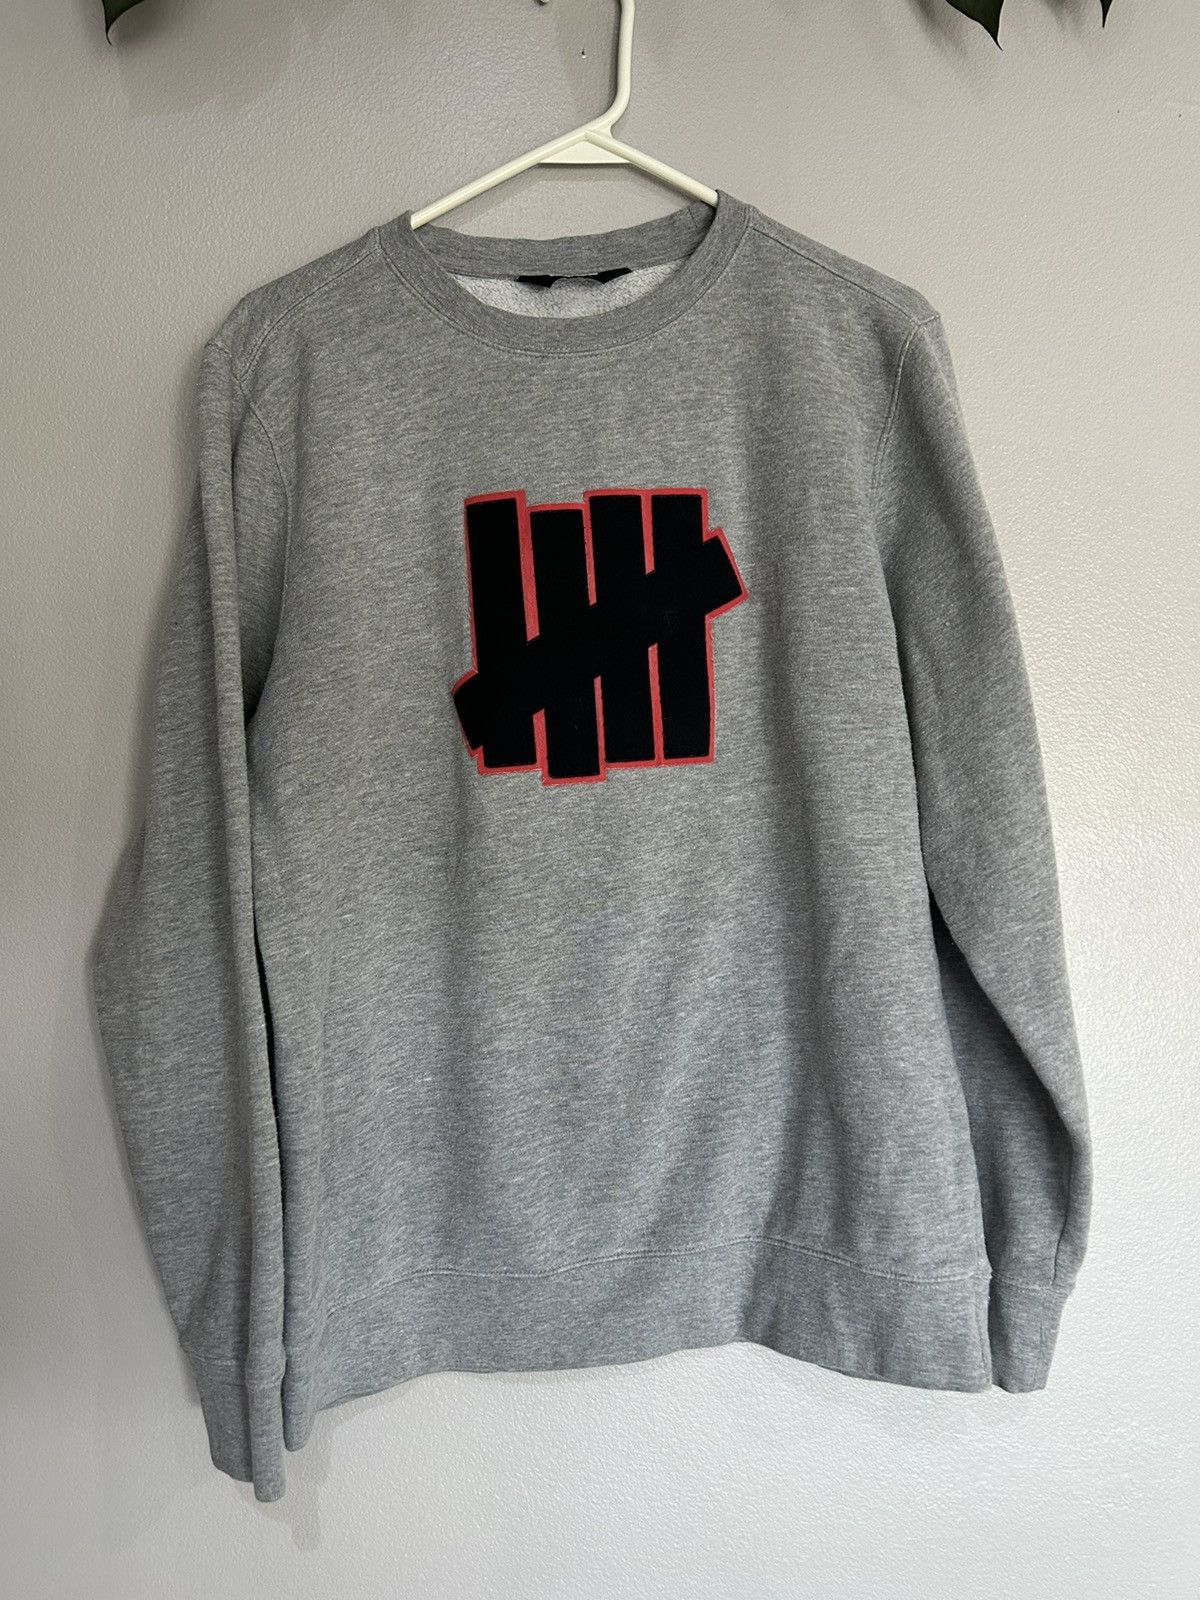 Undefeated Undefeated crewneck m Size US M / EU 48-50 / 2 - 1 Preview